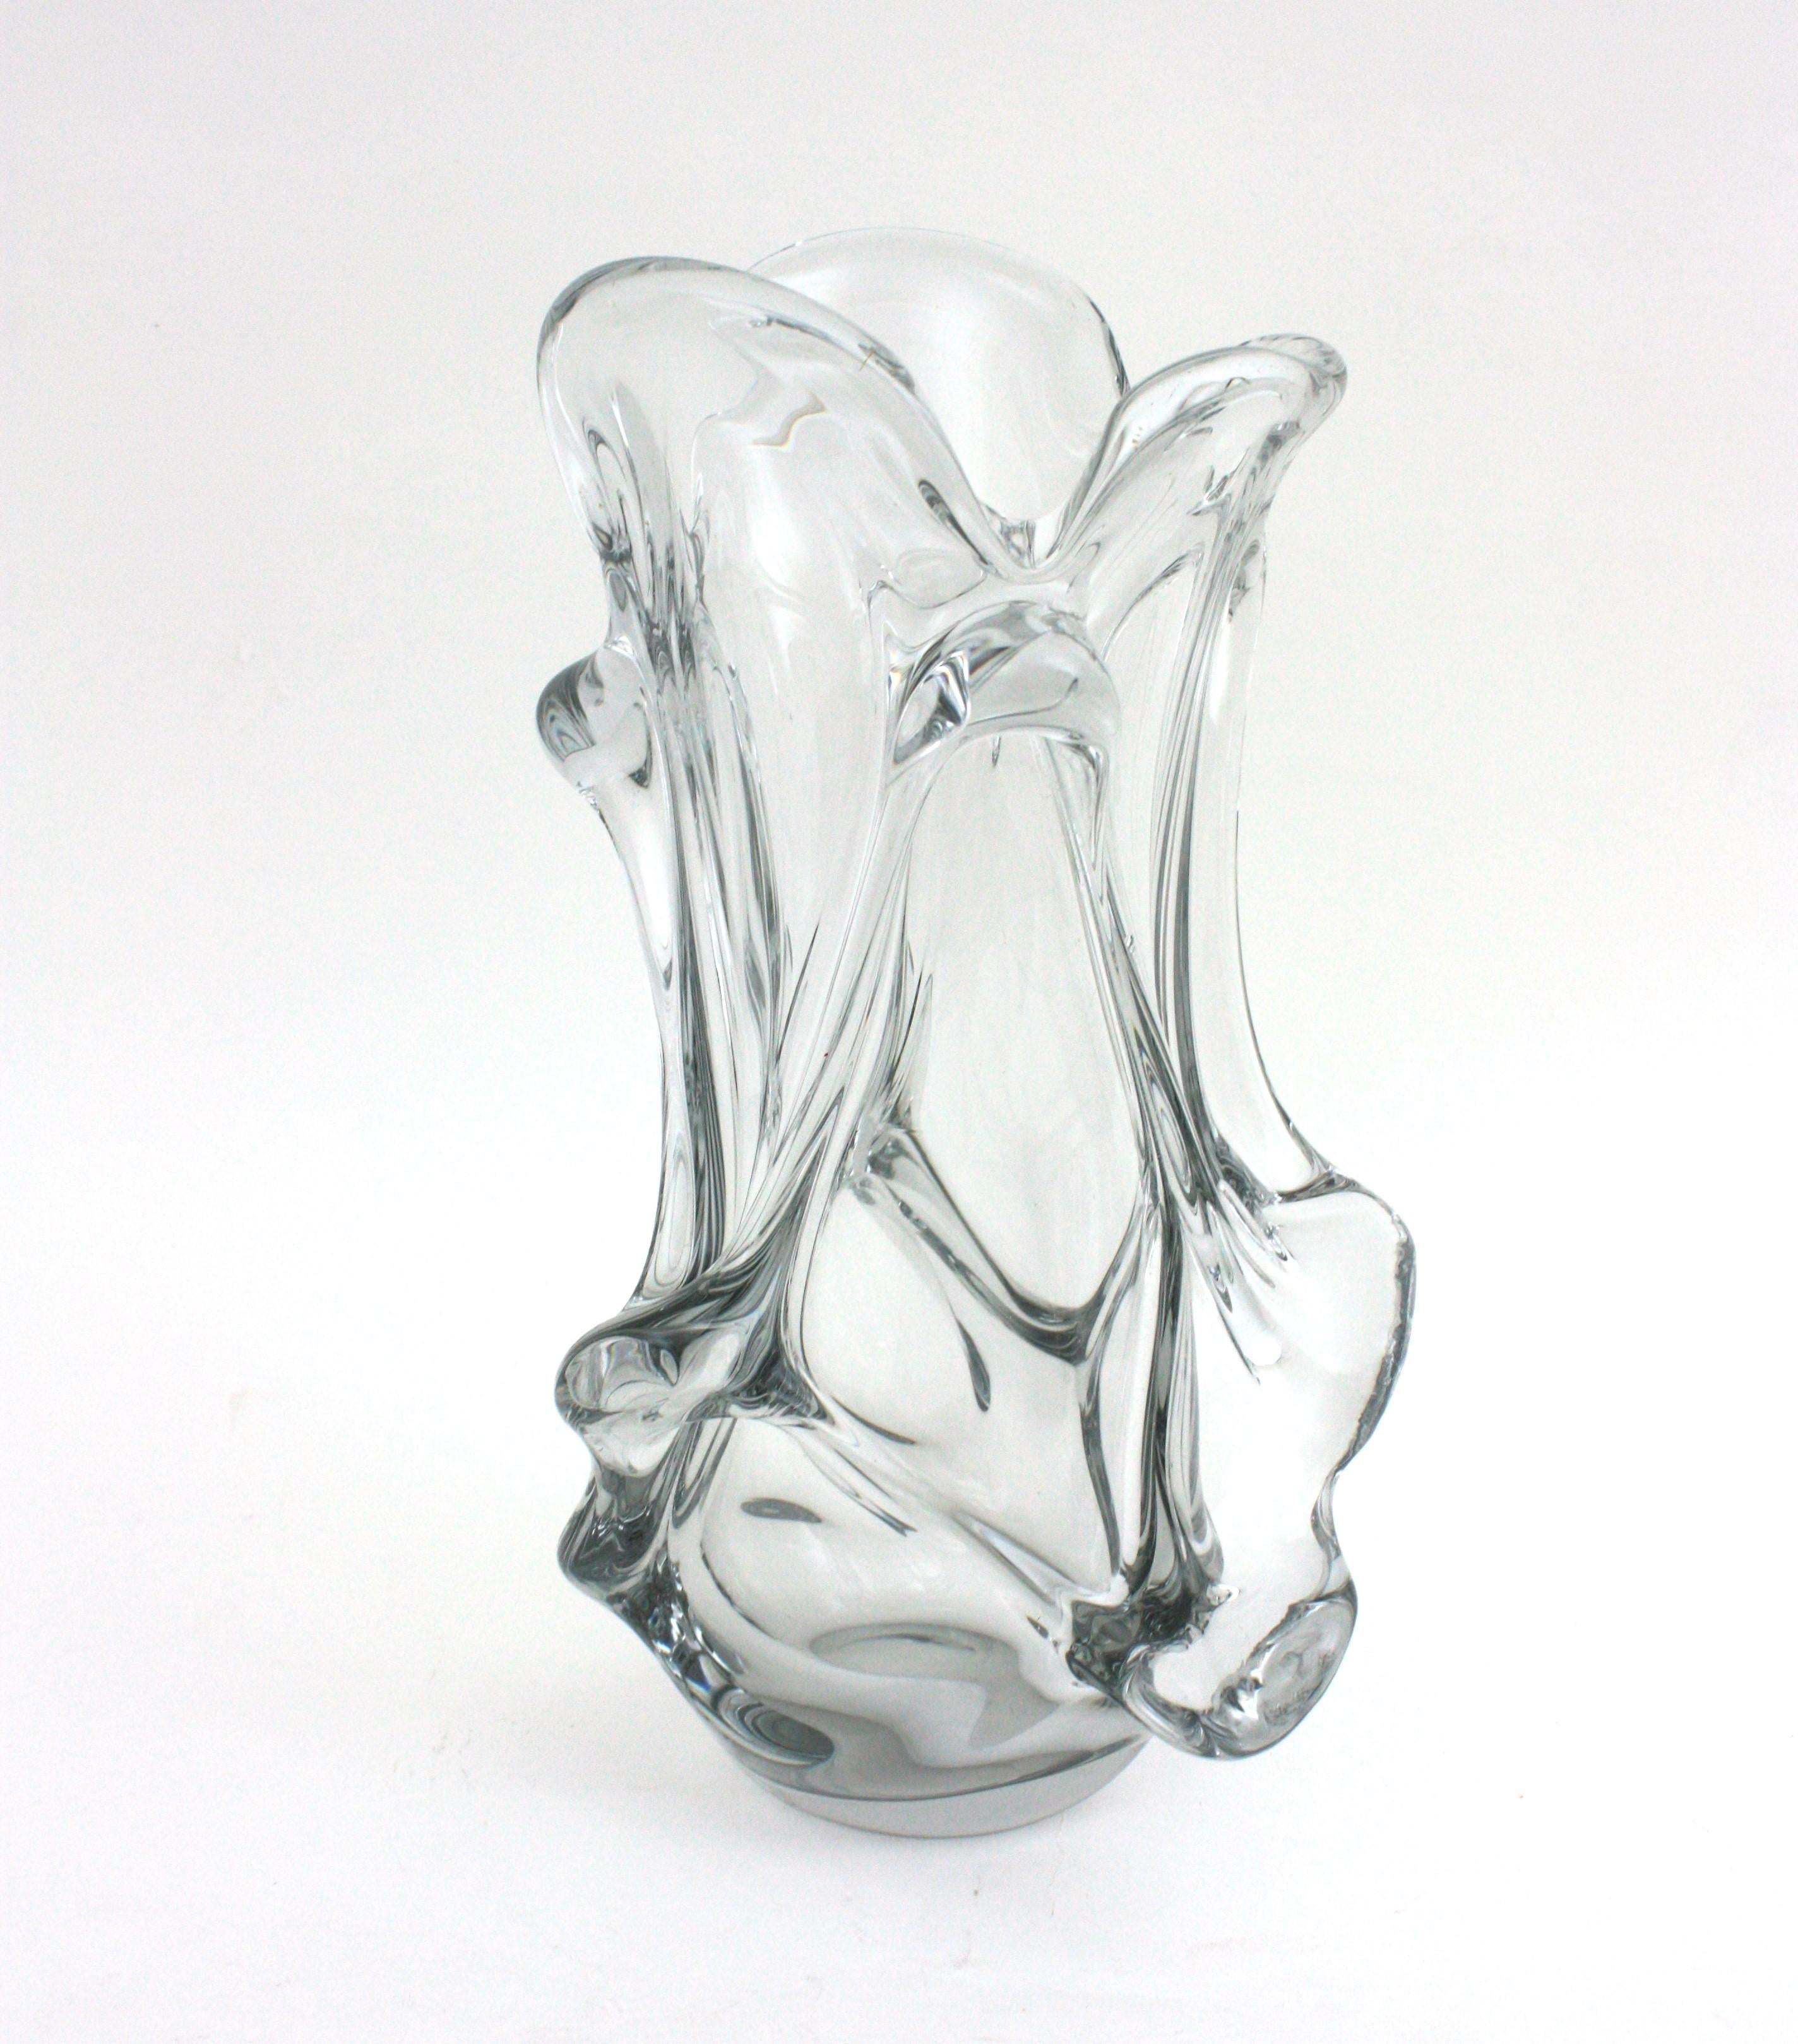 Large Murano Organic Shaped Vase in Clear Glass, 1950s For Sale 3